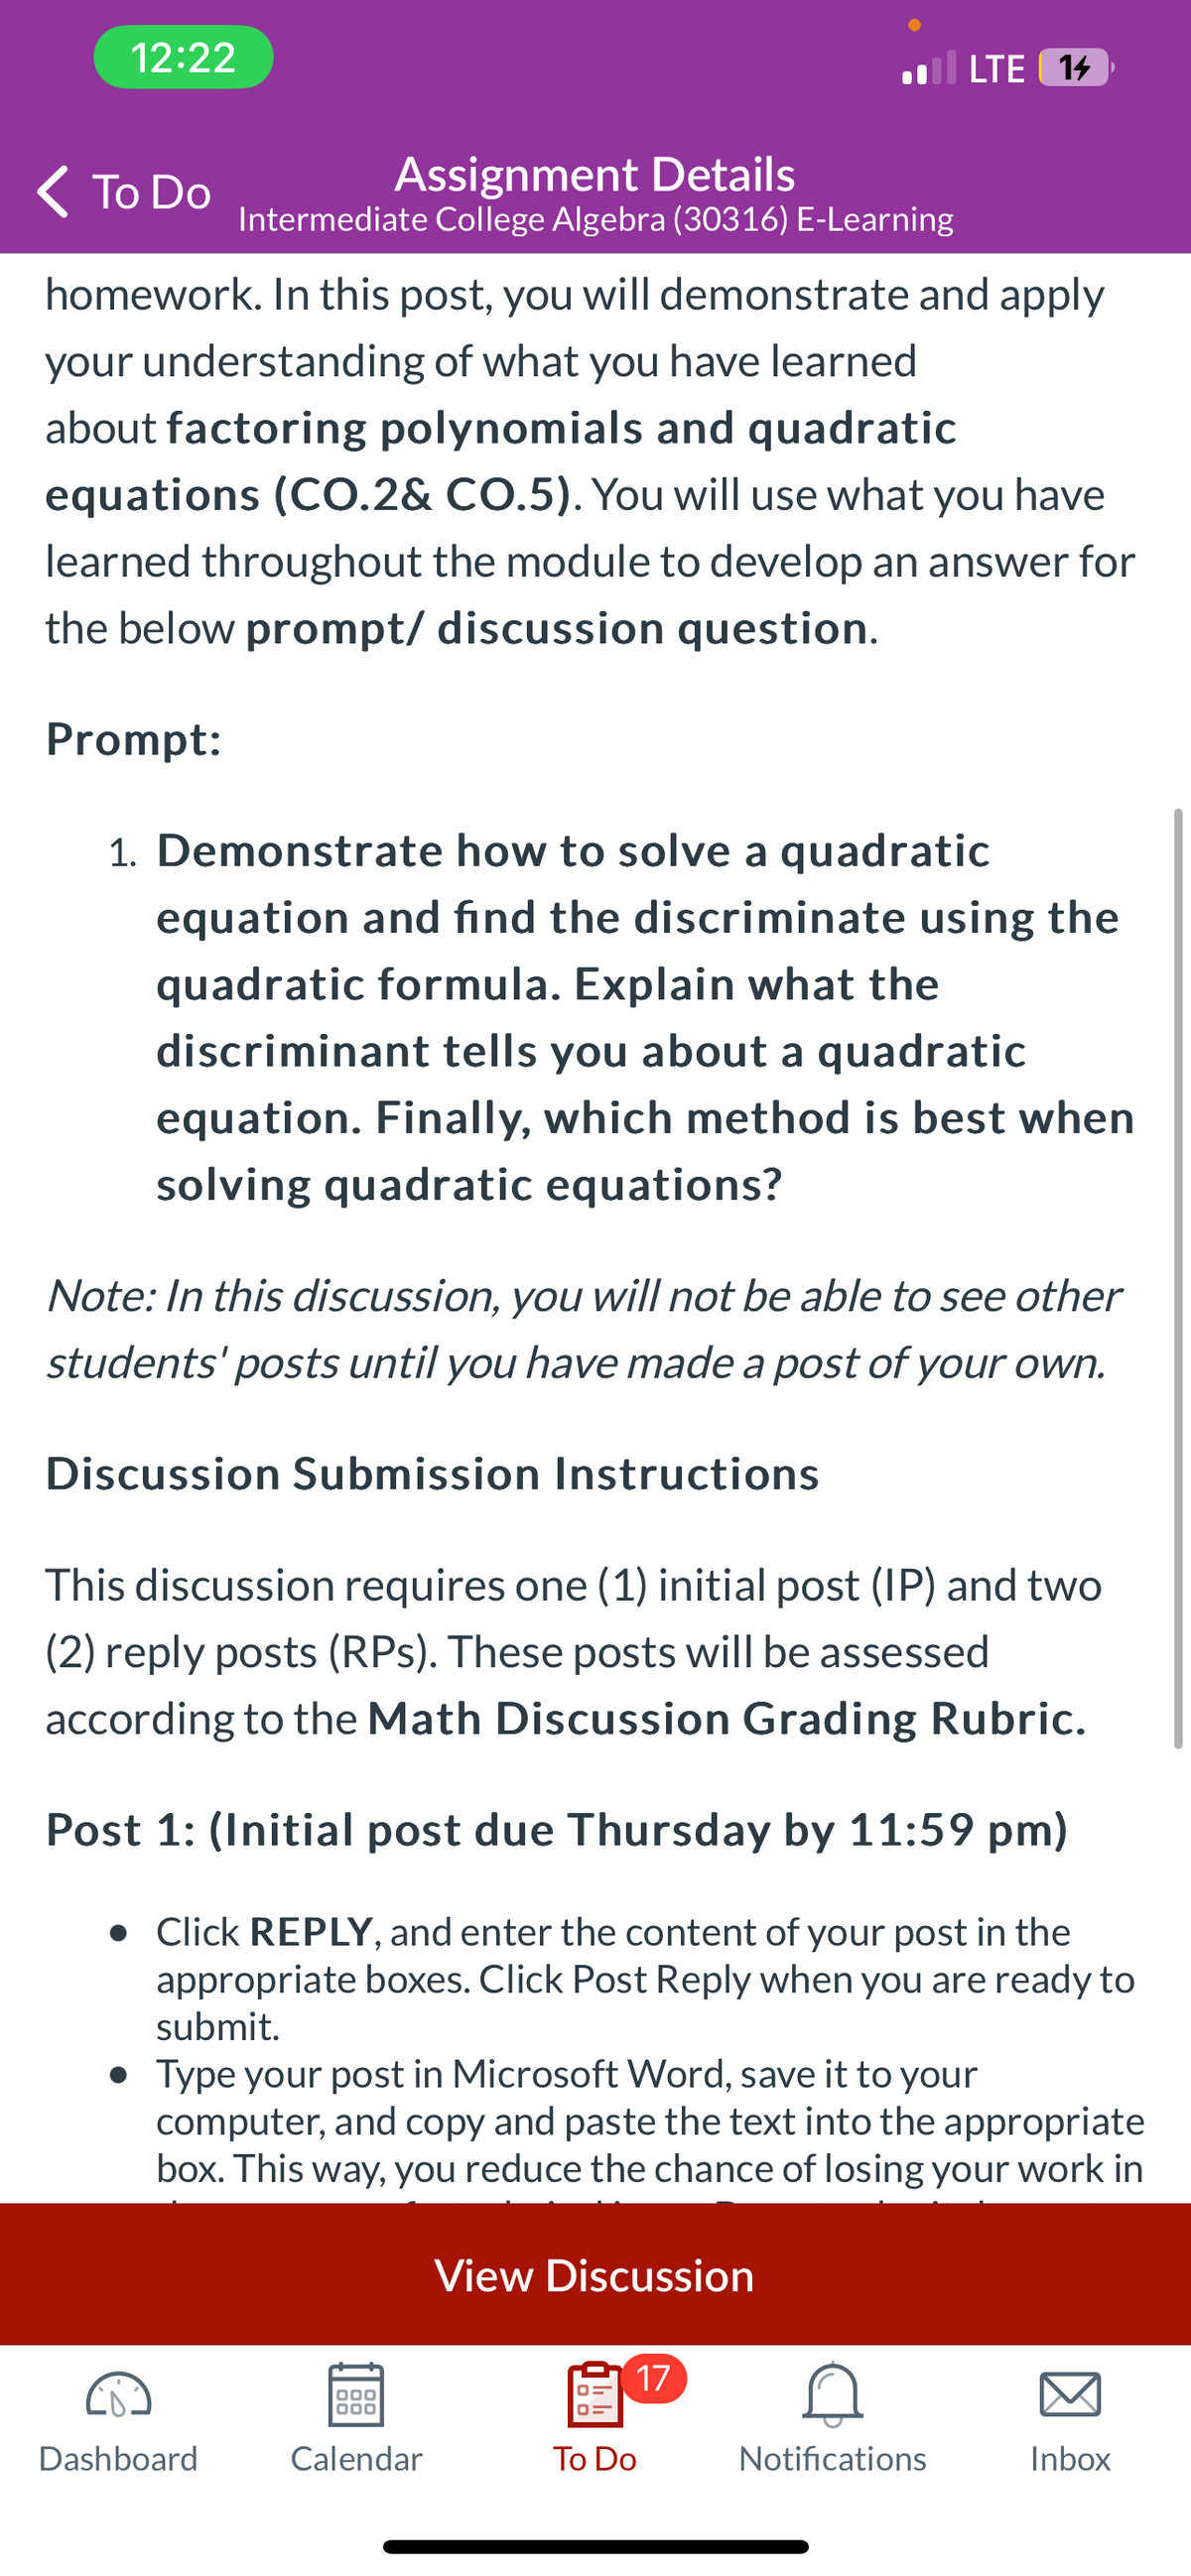 12:22
< To Do
homework. In this post, you will demonstrate and apply
your understanding of what you have learned
about factoring polynomials and quadratic
equations (CO.2& CO.5). You will use what you have
learned throughout the module to develop an answer for
the below prompt/ discussion question.
Assignment Details
Intermediate College Algebra (30316) E-Learning
Prompt:
1. Demonstrate how to solve a quadratic
equation and find the discriminate using the
quadratic formula. Explain what the
discriminant tells you about a quadratic
equation. Finally, which method is best when
solving quadratic equations?
Note: In this discussion, you will not be able to see other
students' posts until you have made a post of your own.
Discussion Submission Instructions
. LTE 14
This discussion requires one (1) initial post (IP) and two
(2) reply posts (RPs). These posts will be assessed
according to the Math Discussion Grading Rubric.
Post 1: (Initial post due Thursday by 11:59 pm)
. Click REPLY, and enter the content of your post in the
appropriate boxes. Click Post Reply when you are ready to
submit.
Dashboard
Type your post in Microsoft Word, save it to your
computer, and copy and paste the text into the appropriate
box. This way, you reduce the chance of losing your work in
000
000
Calendar
View Discussion
17
To Do
Notifications
Inbox